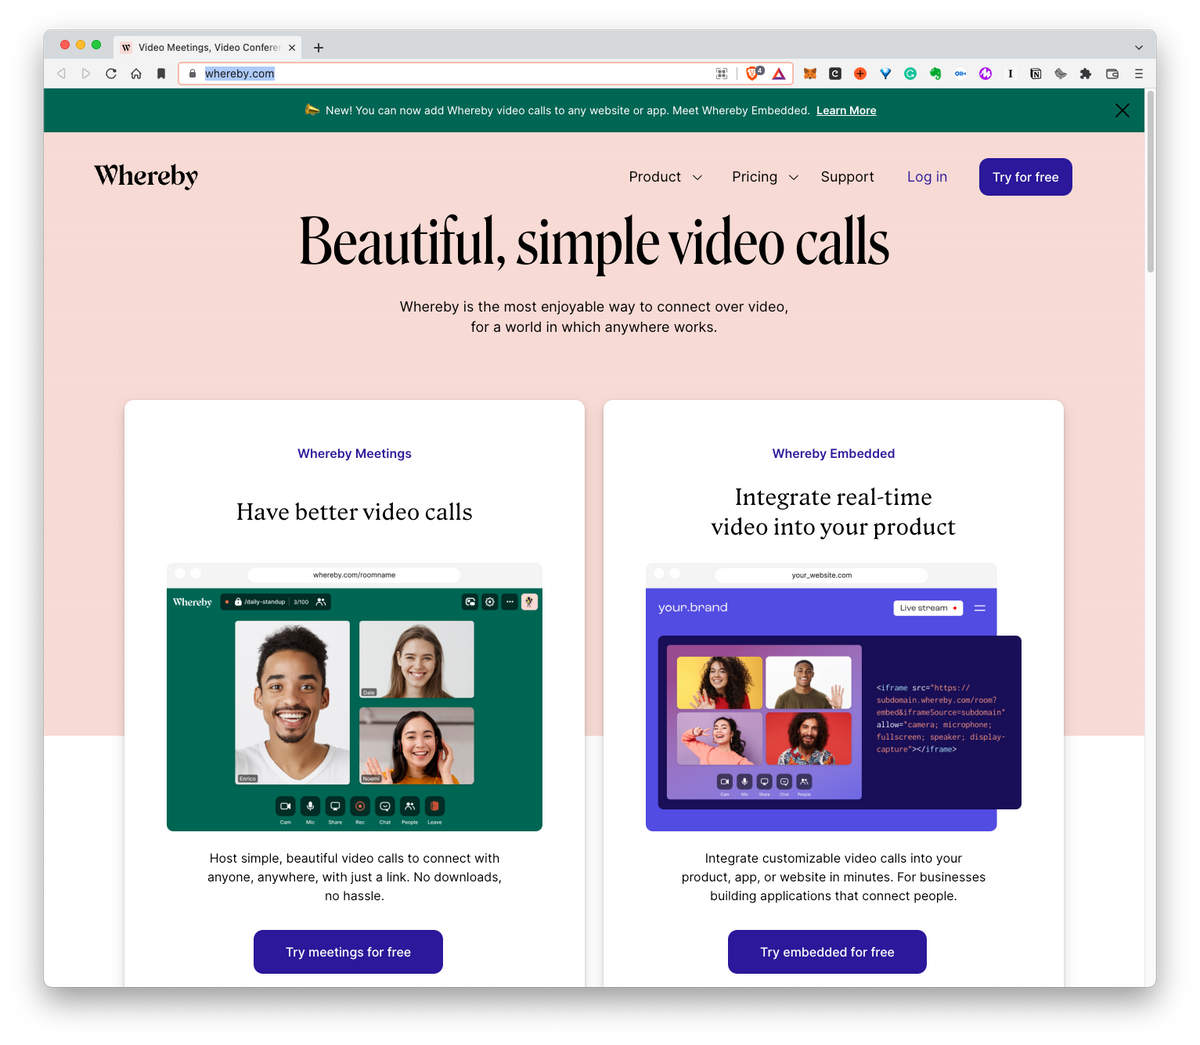 Whereby: Beautiful, simple video calls. The most enjoyable way to connect over video, for a world in which anywhere works.